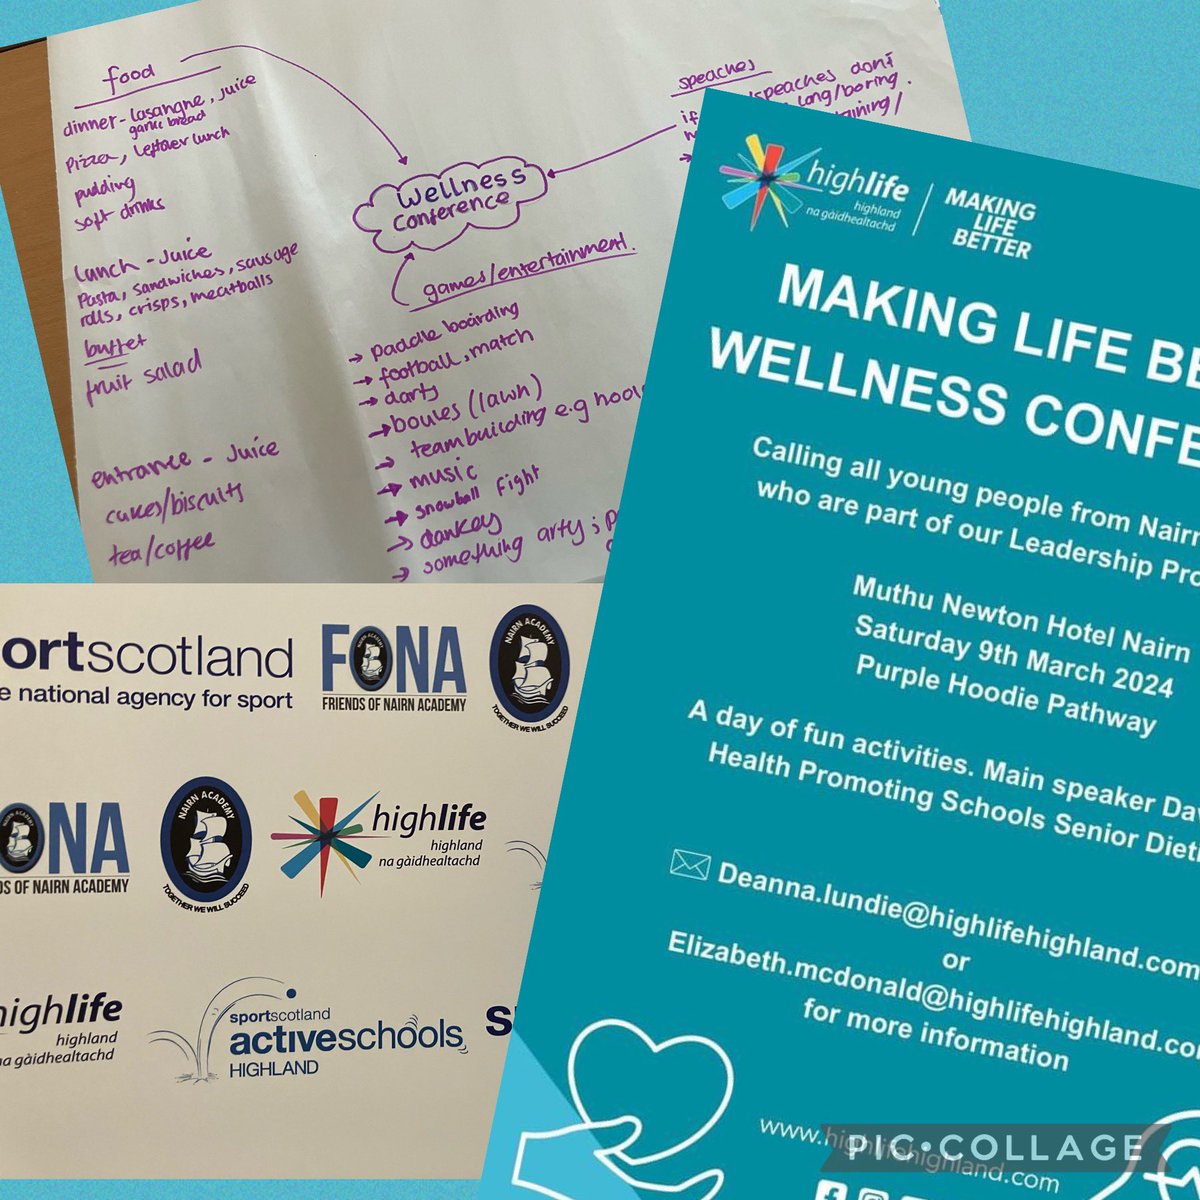 The countdown is on. Ready to roll for tomorrow’s #HLHMakingLifeBetter Conference #YoungLeaders  ✔️ #Food✔️ #lasagne✔️ #Fun✔️ #Active✔️ #Speakers✔️ #Relaxation✔️ #Mindfulness✔️ #Art✔️ #Snowballfight✔️ #Leadership✔️#Choosetolead #Itsallaboutthehoodie  @NairnAcad #madeinNairn✔️